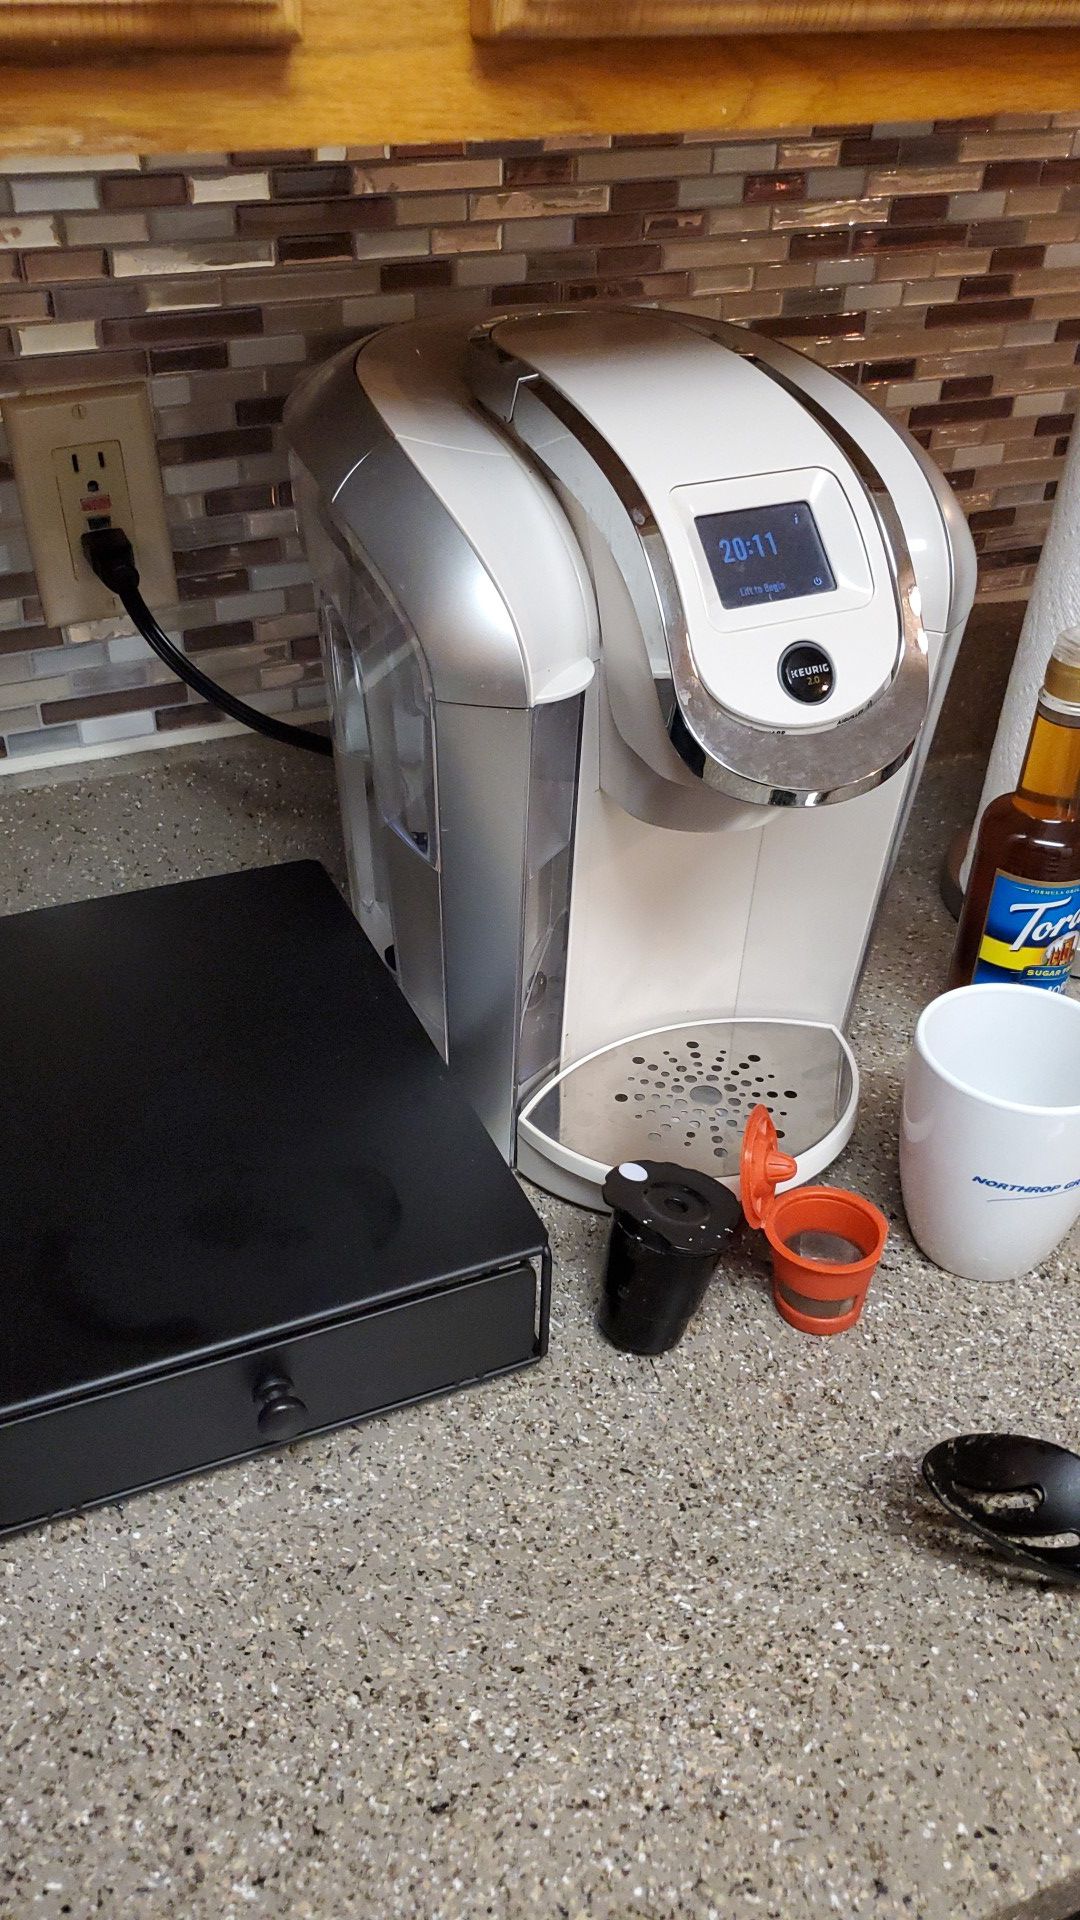 Keurig 2.0 w/ k-cup organizer and 2 compatible coffee ground adapter cups